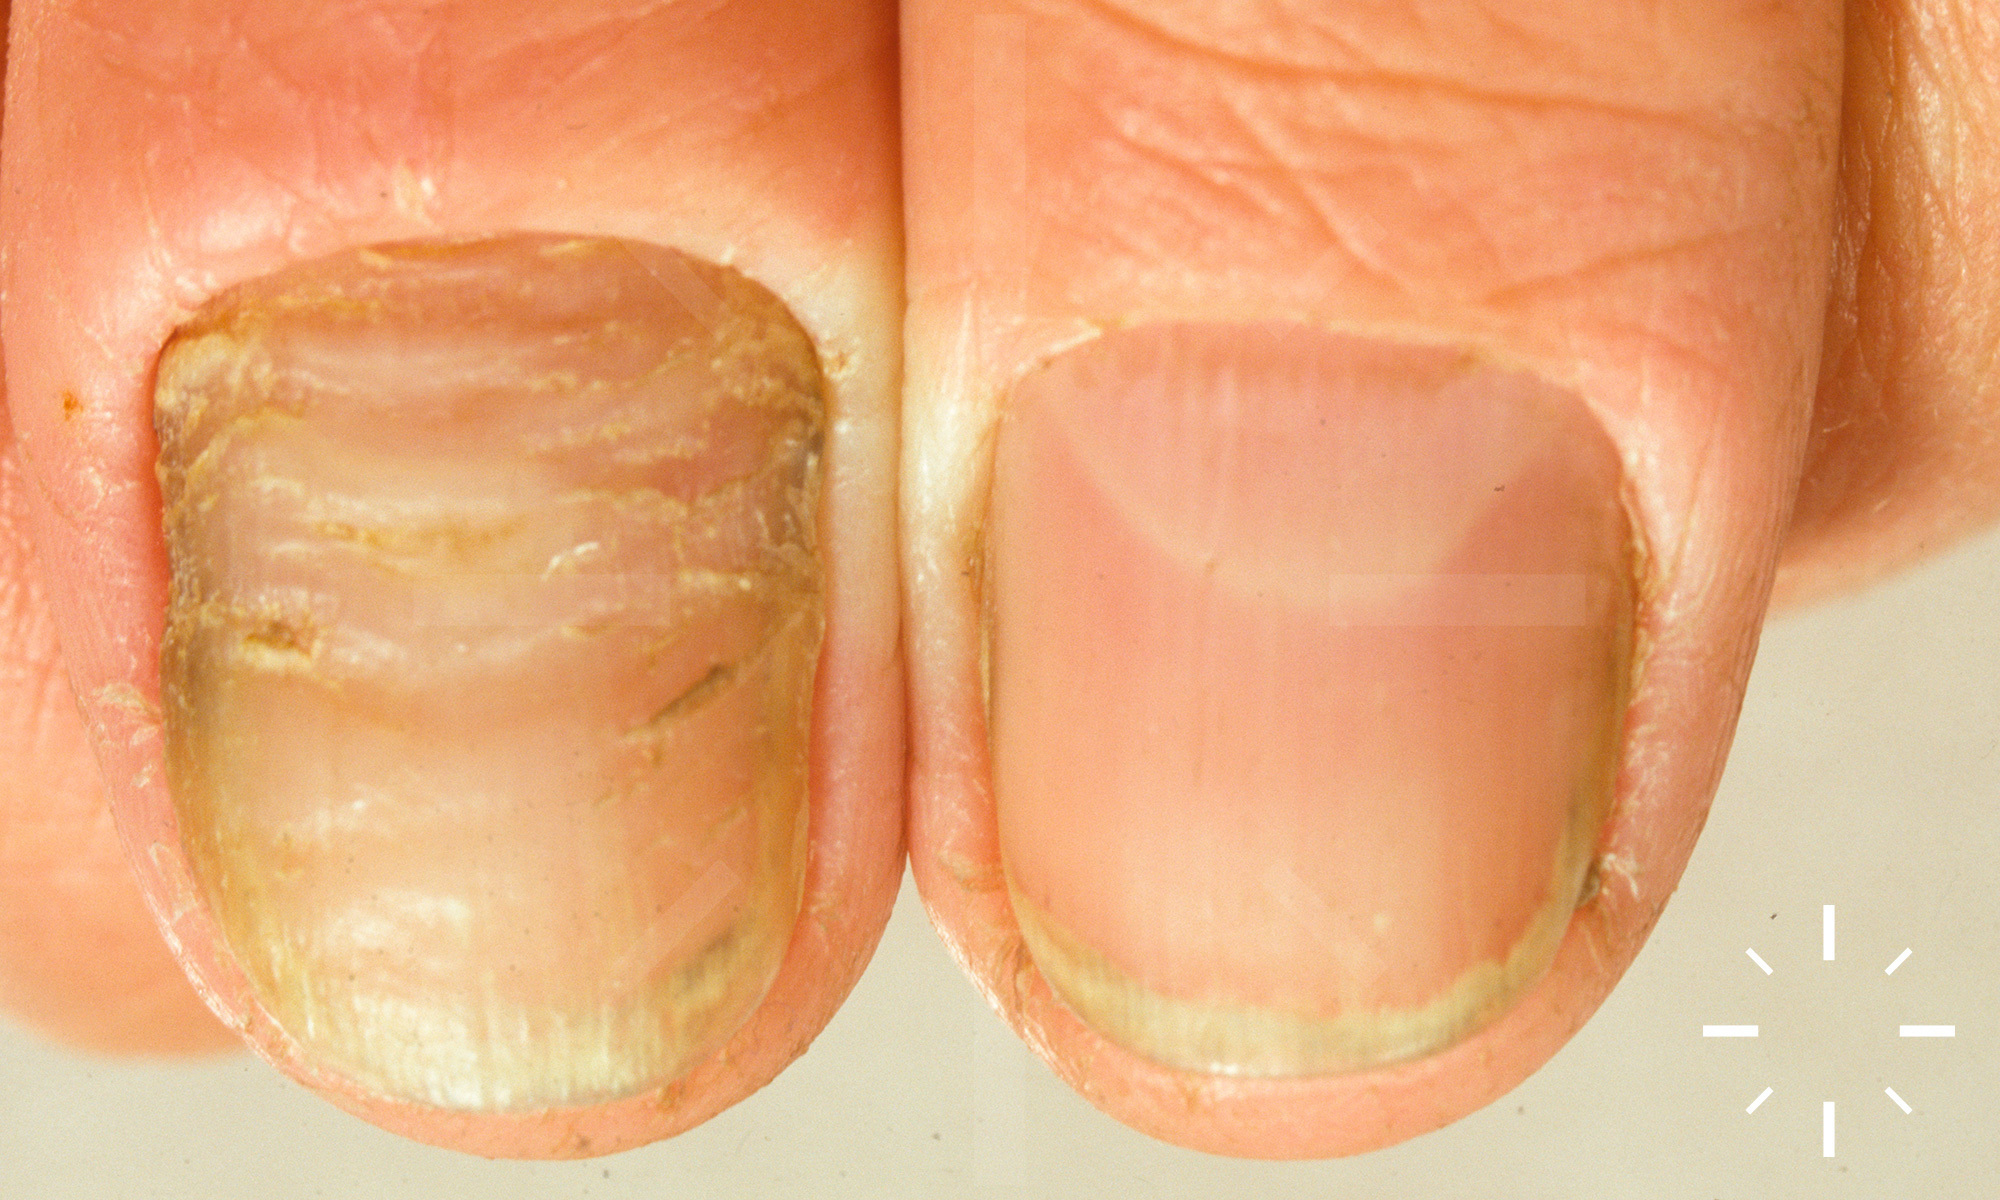 Green Nail Syndrome (Pseudomonas aeruginosa Nail Infection): Two Cases  Successfully Treated with Topical Nadifloxacin, an Acne Medication. -  Abstract - Europe PMC